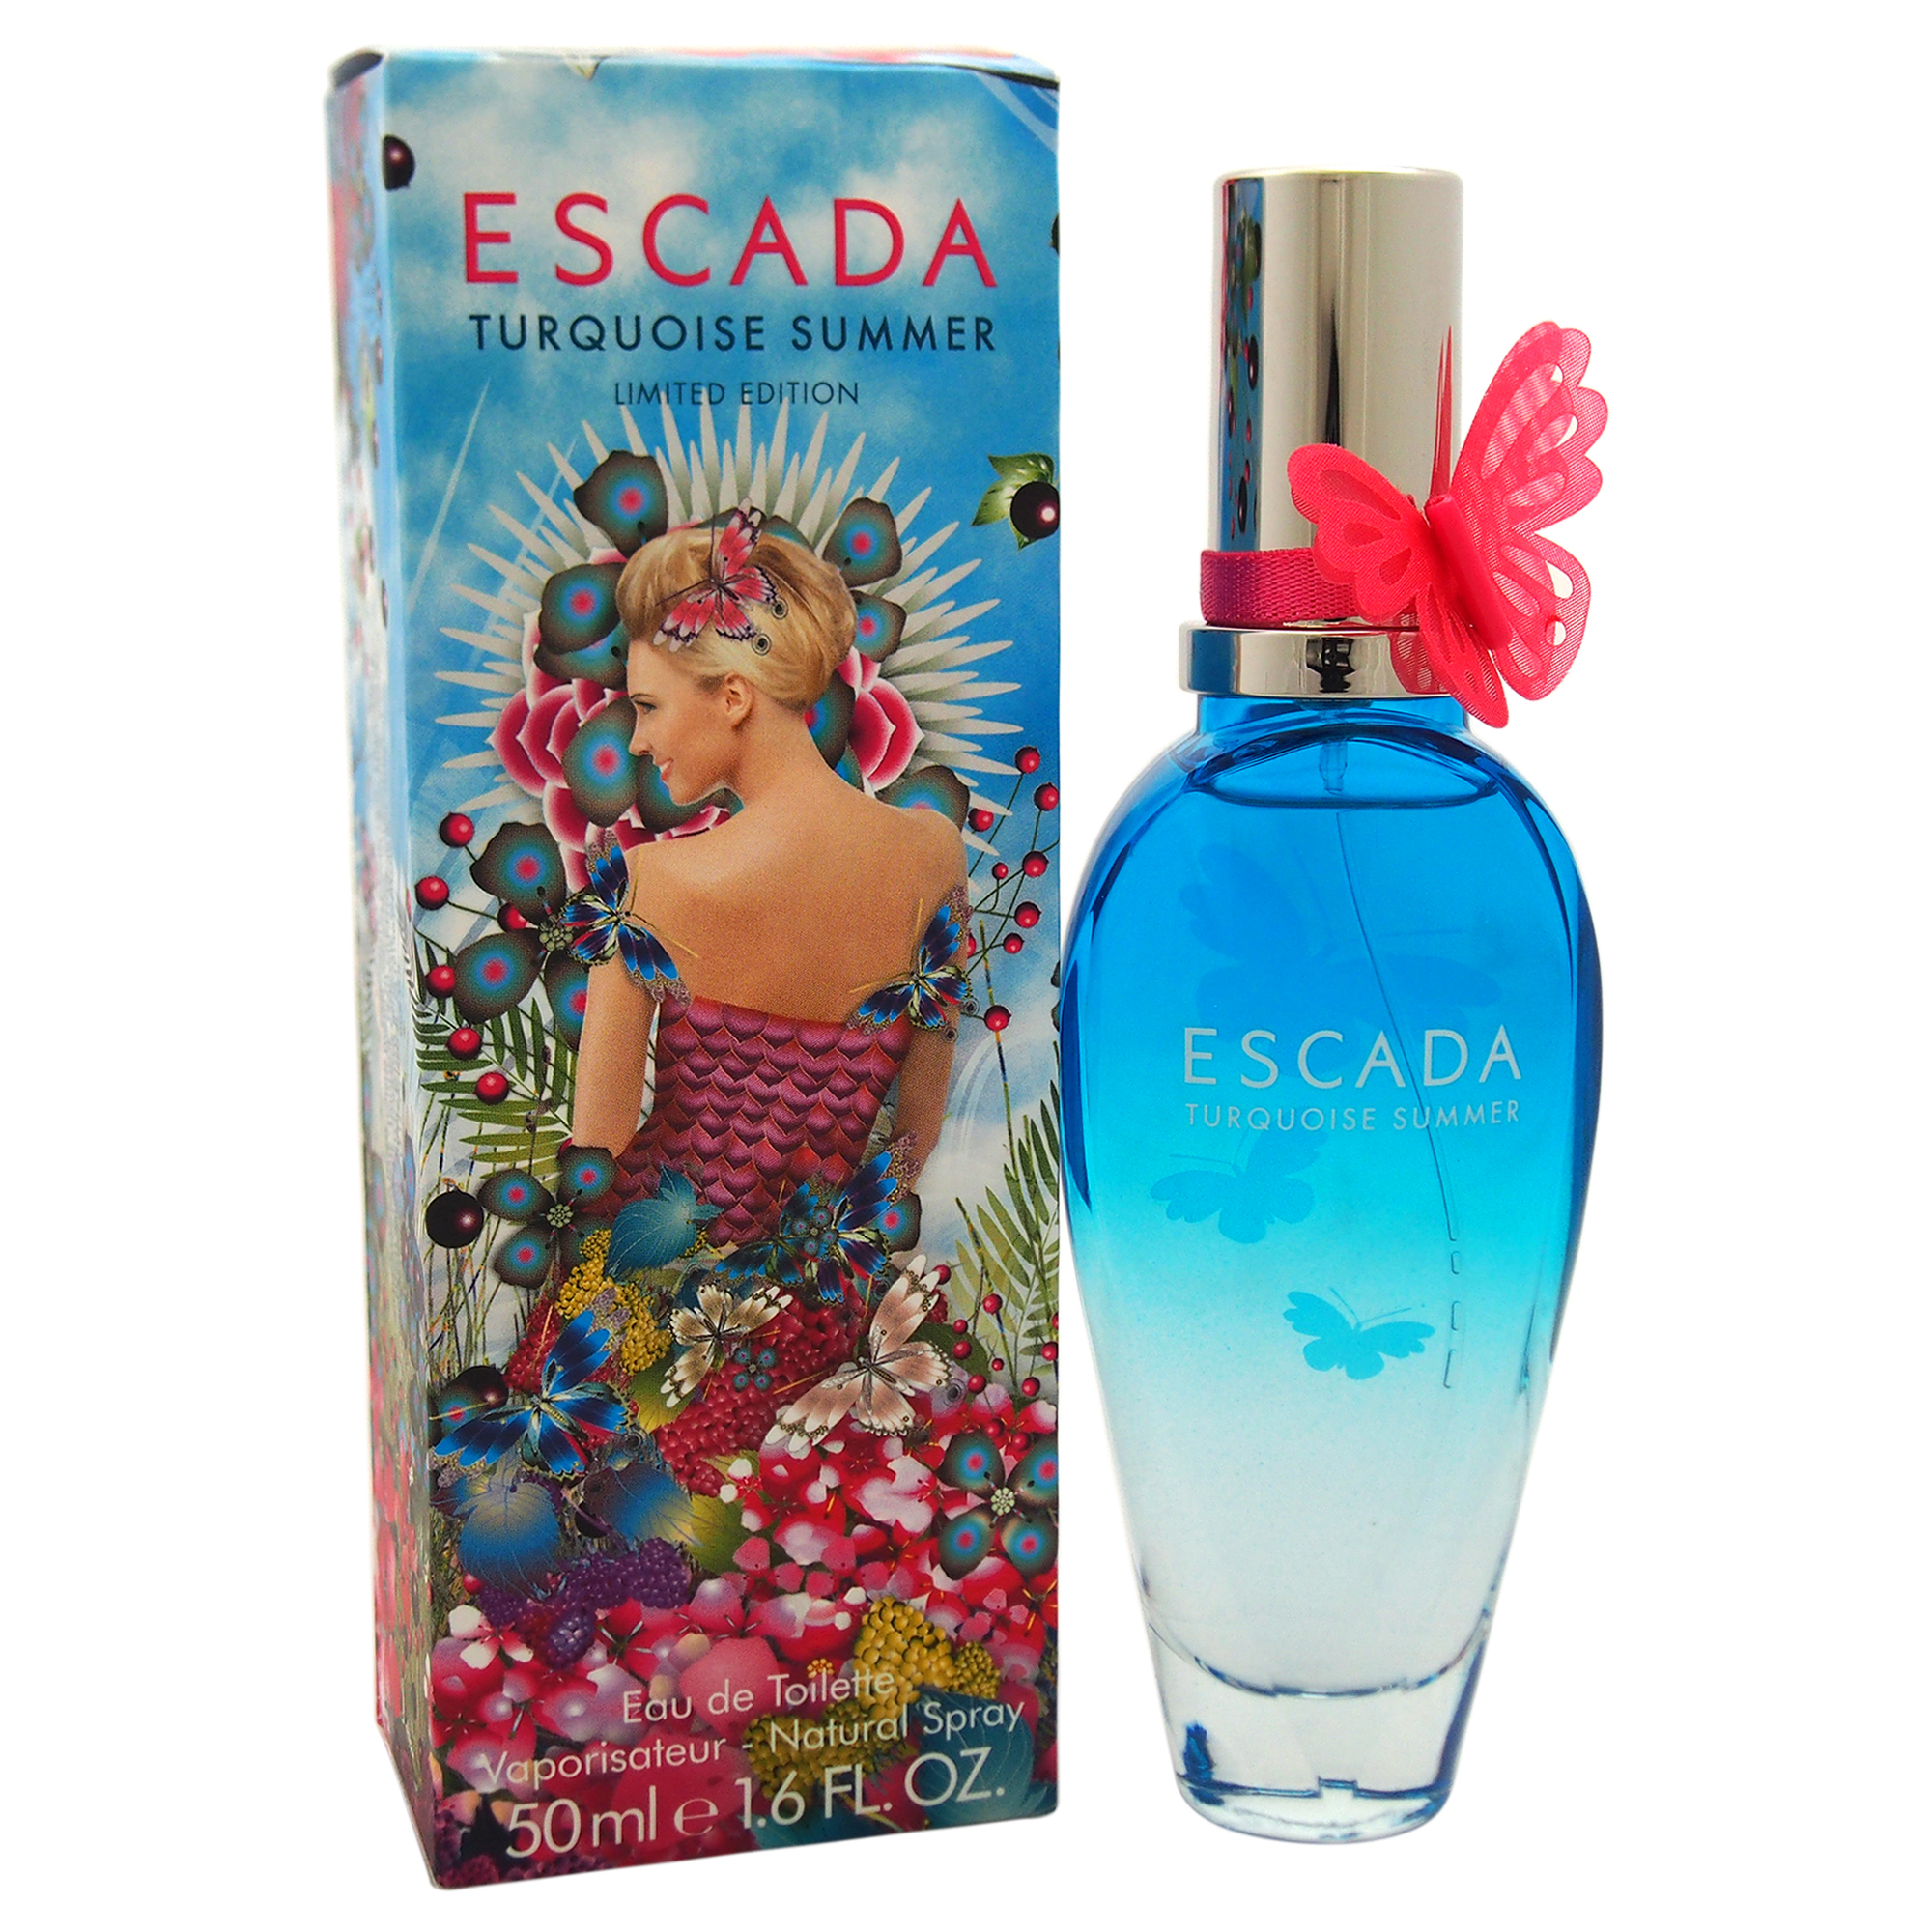 Turquoise Summer by Escada for Women - 1.6 oz EDT Spray (Limited Edition)